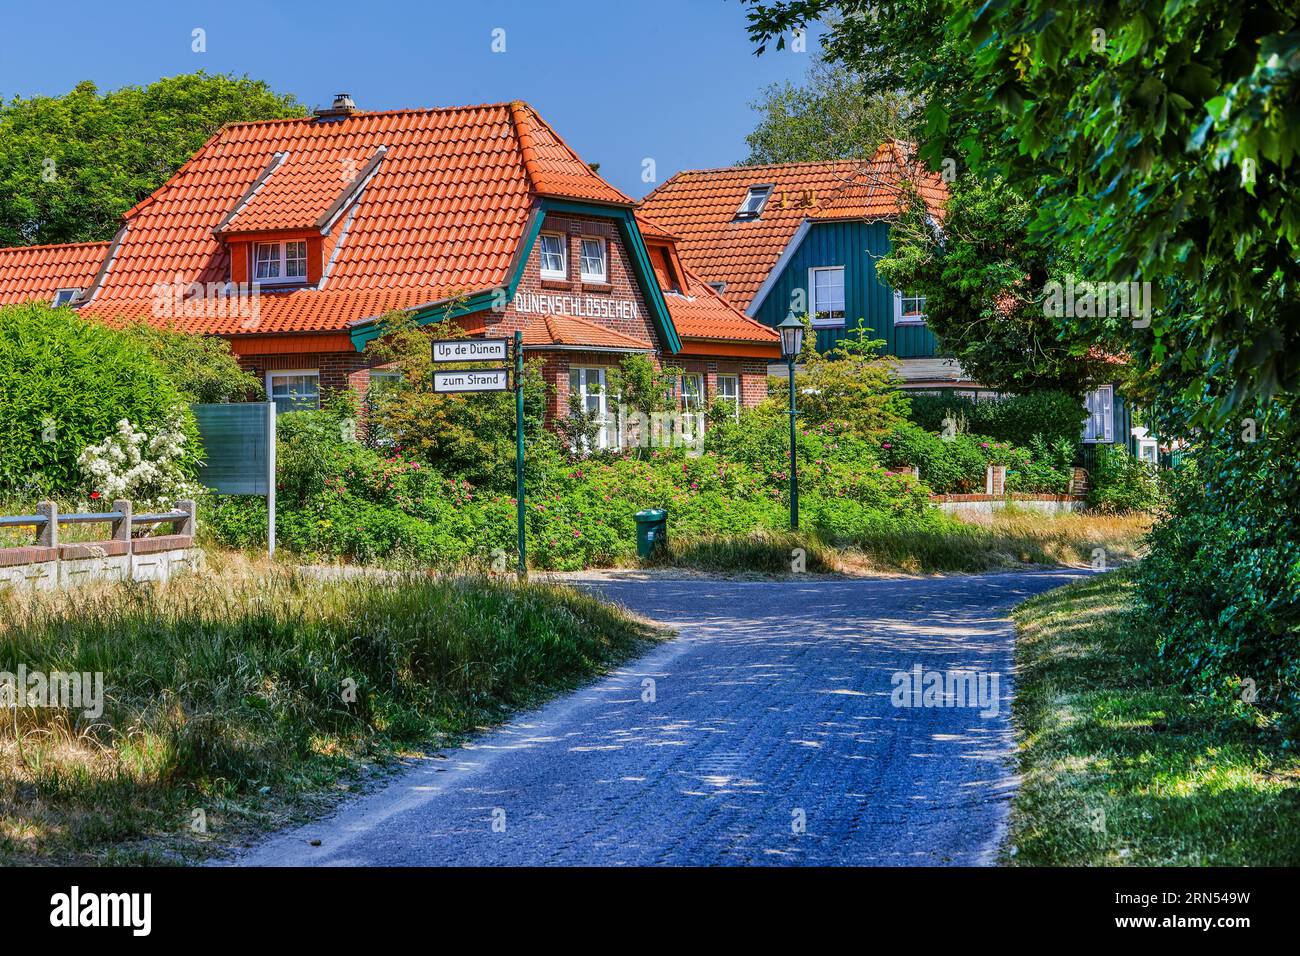 Village street with typical houses, Spiekeroog, North Sea spa, North Sea island, East Frisian Islands, Lower Saxony Wadden Sea, East Frisia, Lower Stock Photo